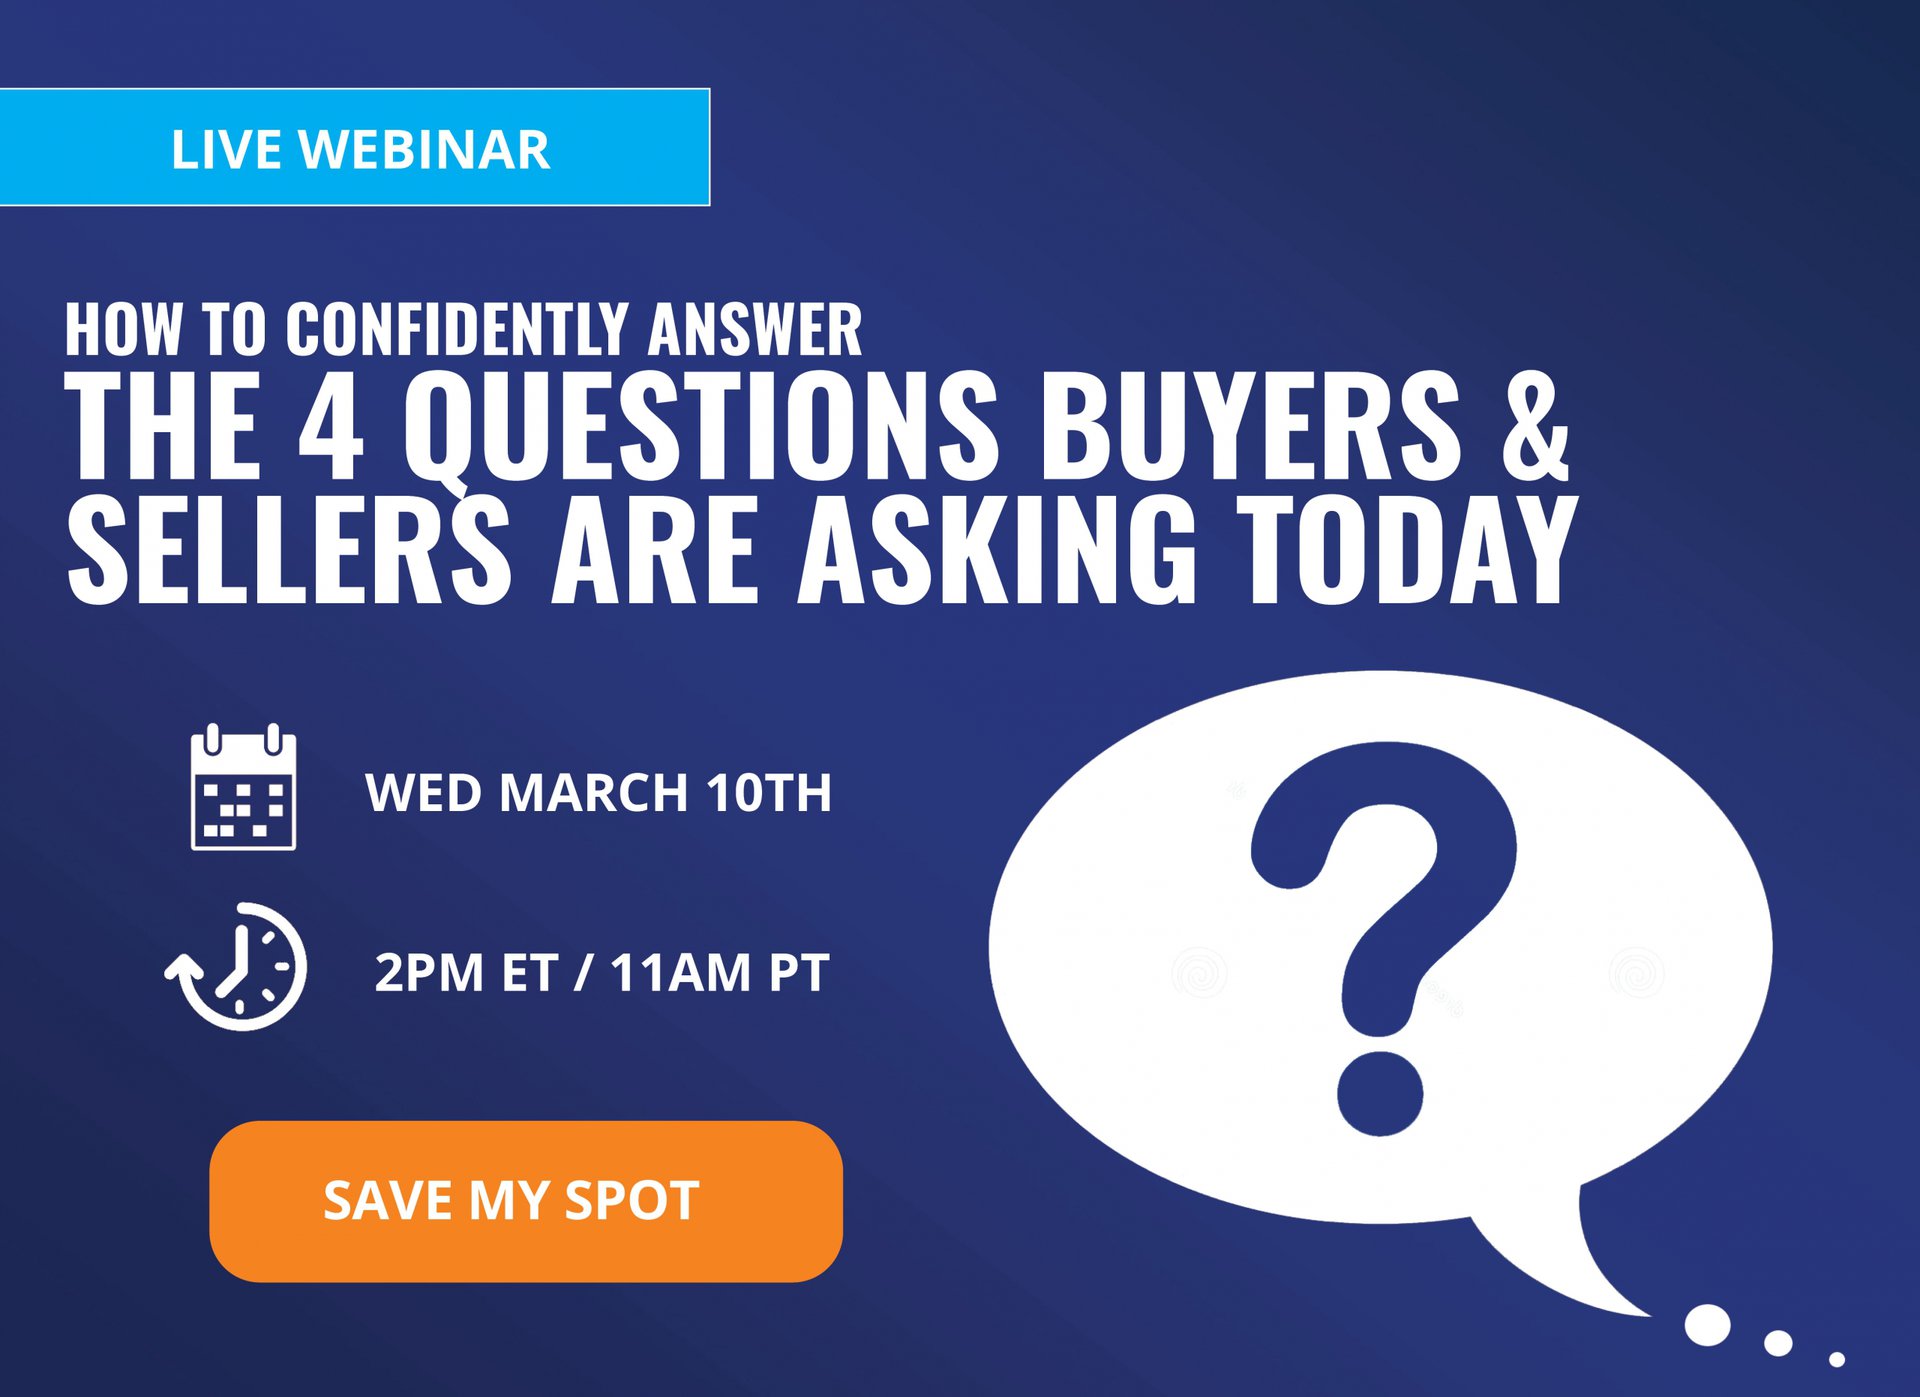 How to Confidently Answer the 4 Questions Buyers & Sellers Are Asking Today | Keeping Current Matters